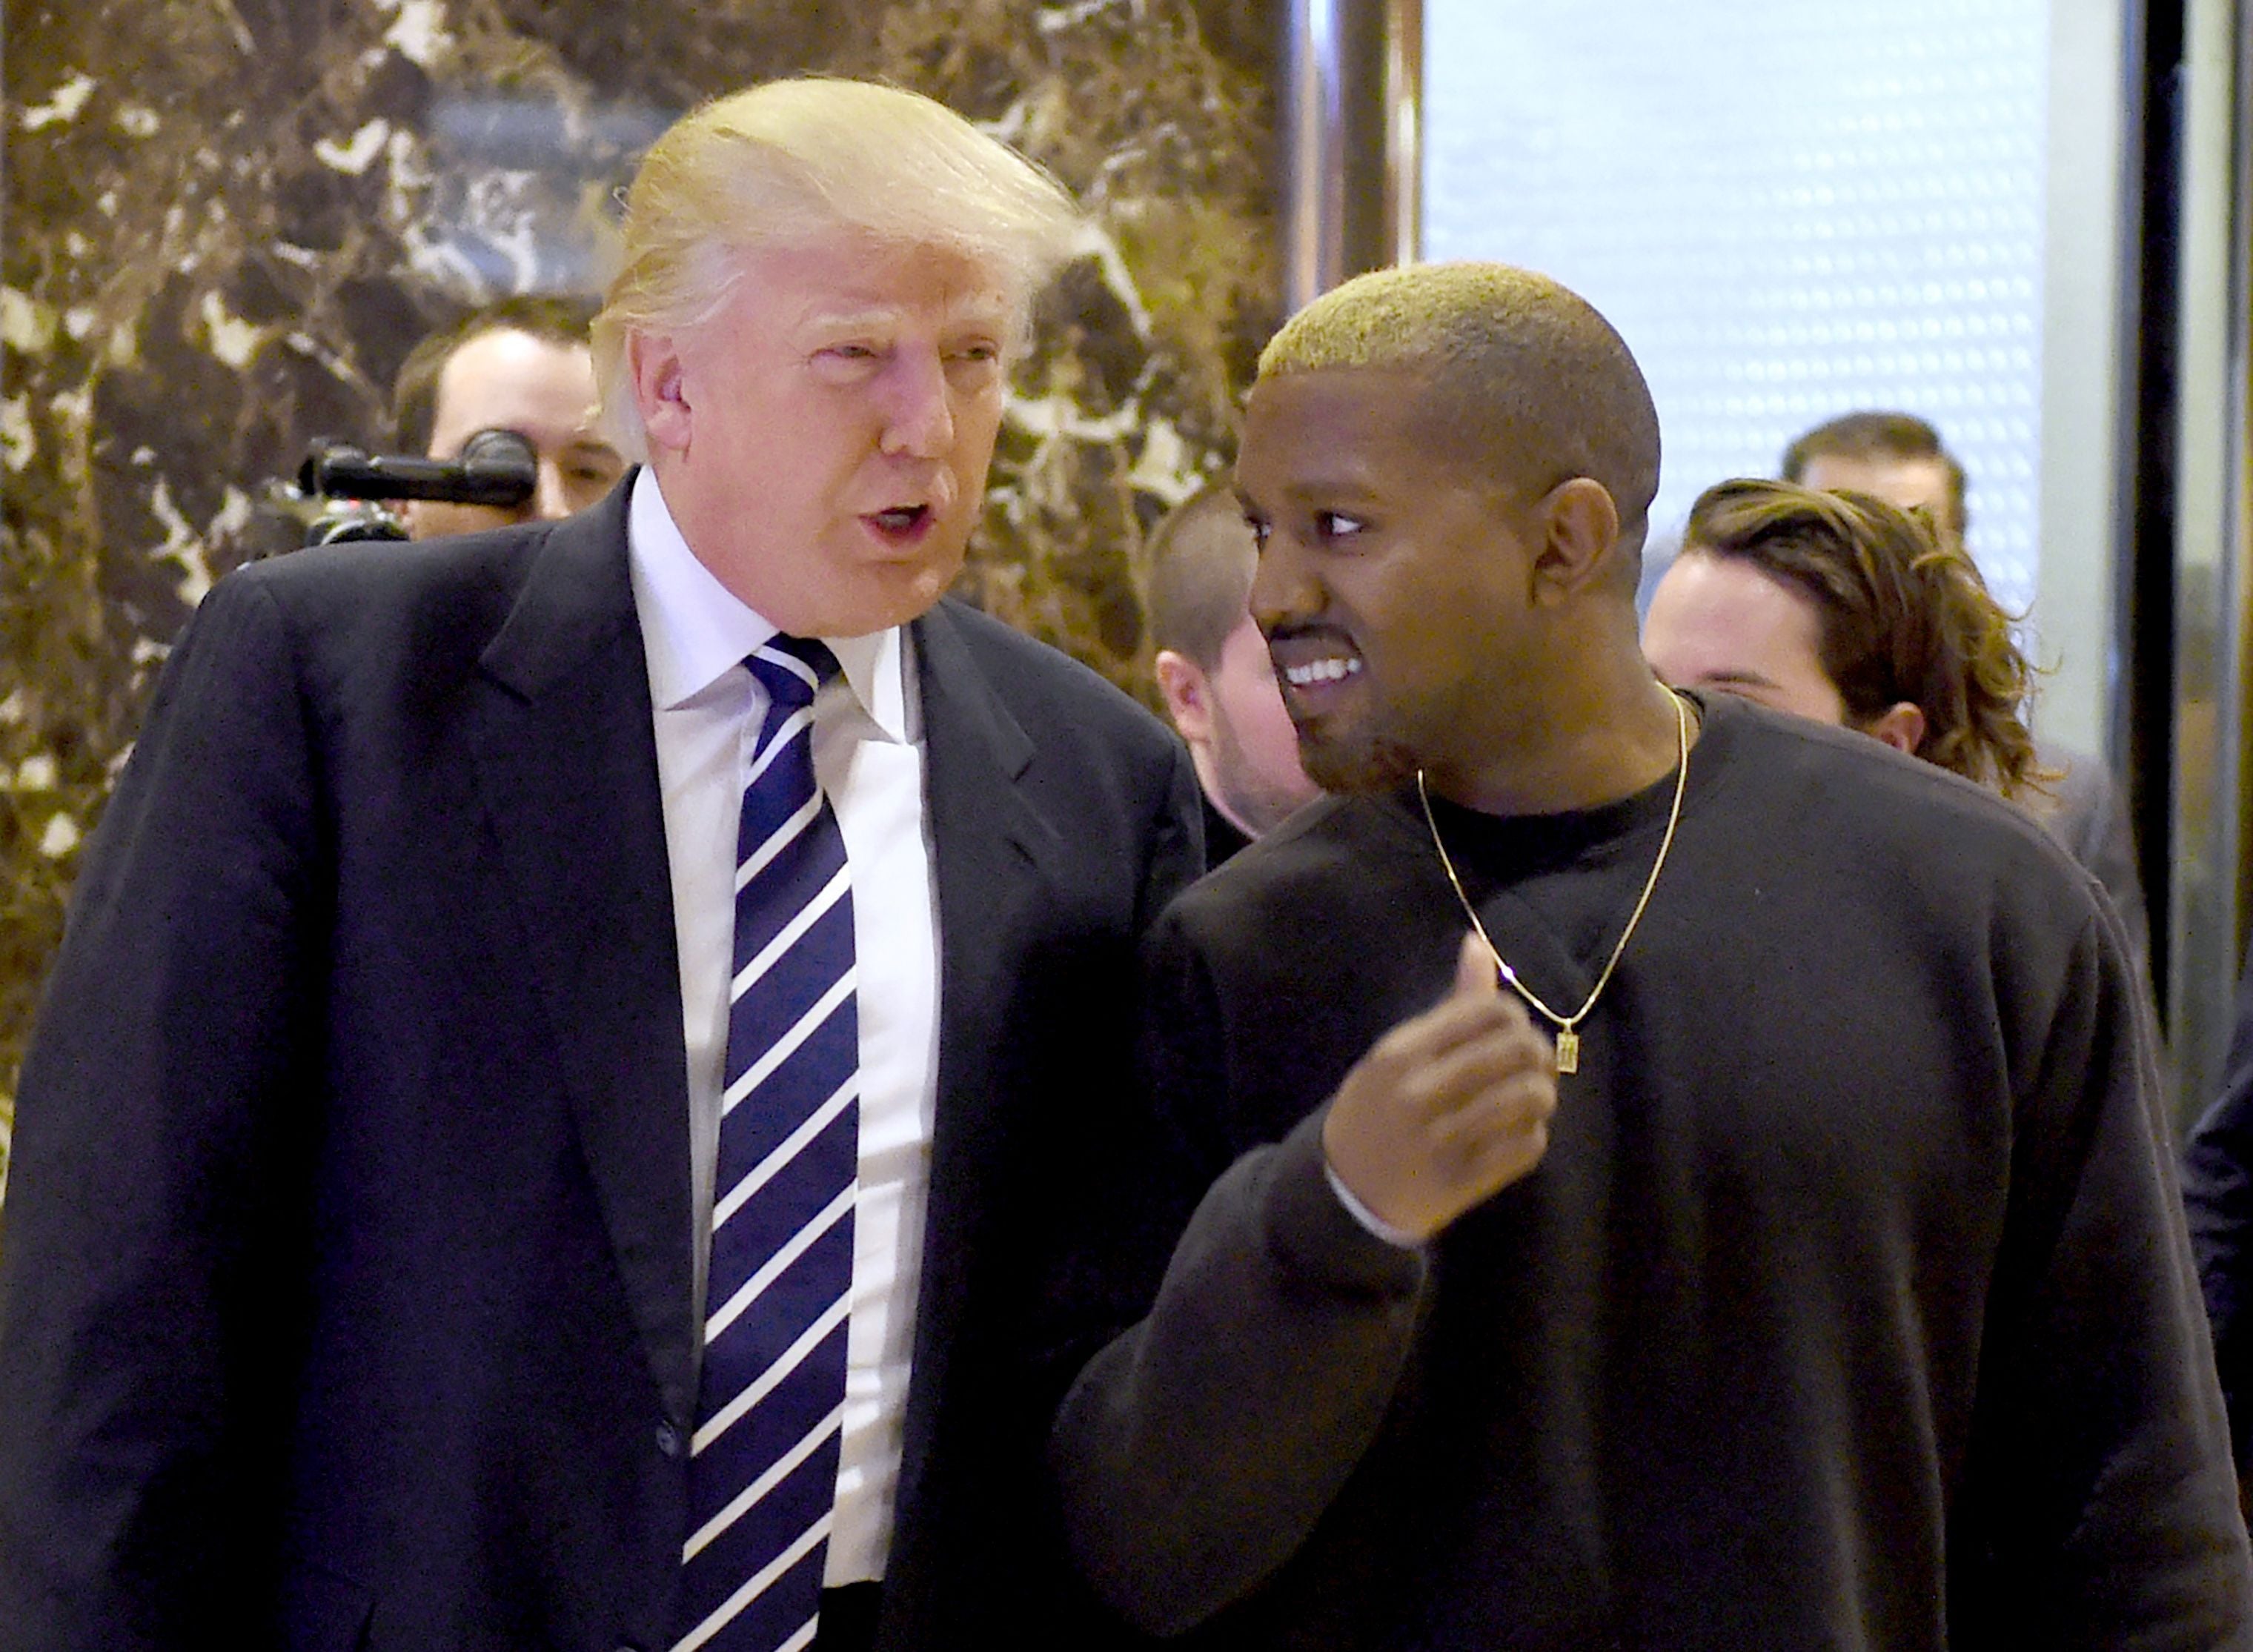 Kanye West and Trump after a meeting at Trump Tower in New York in 2016. Trump was thankful for West’s support until the rapper began voicing antisemitic views in 2022, leading to Trump calling him a ‘seriously troubled man’